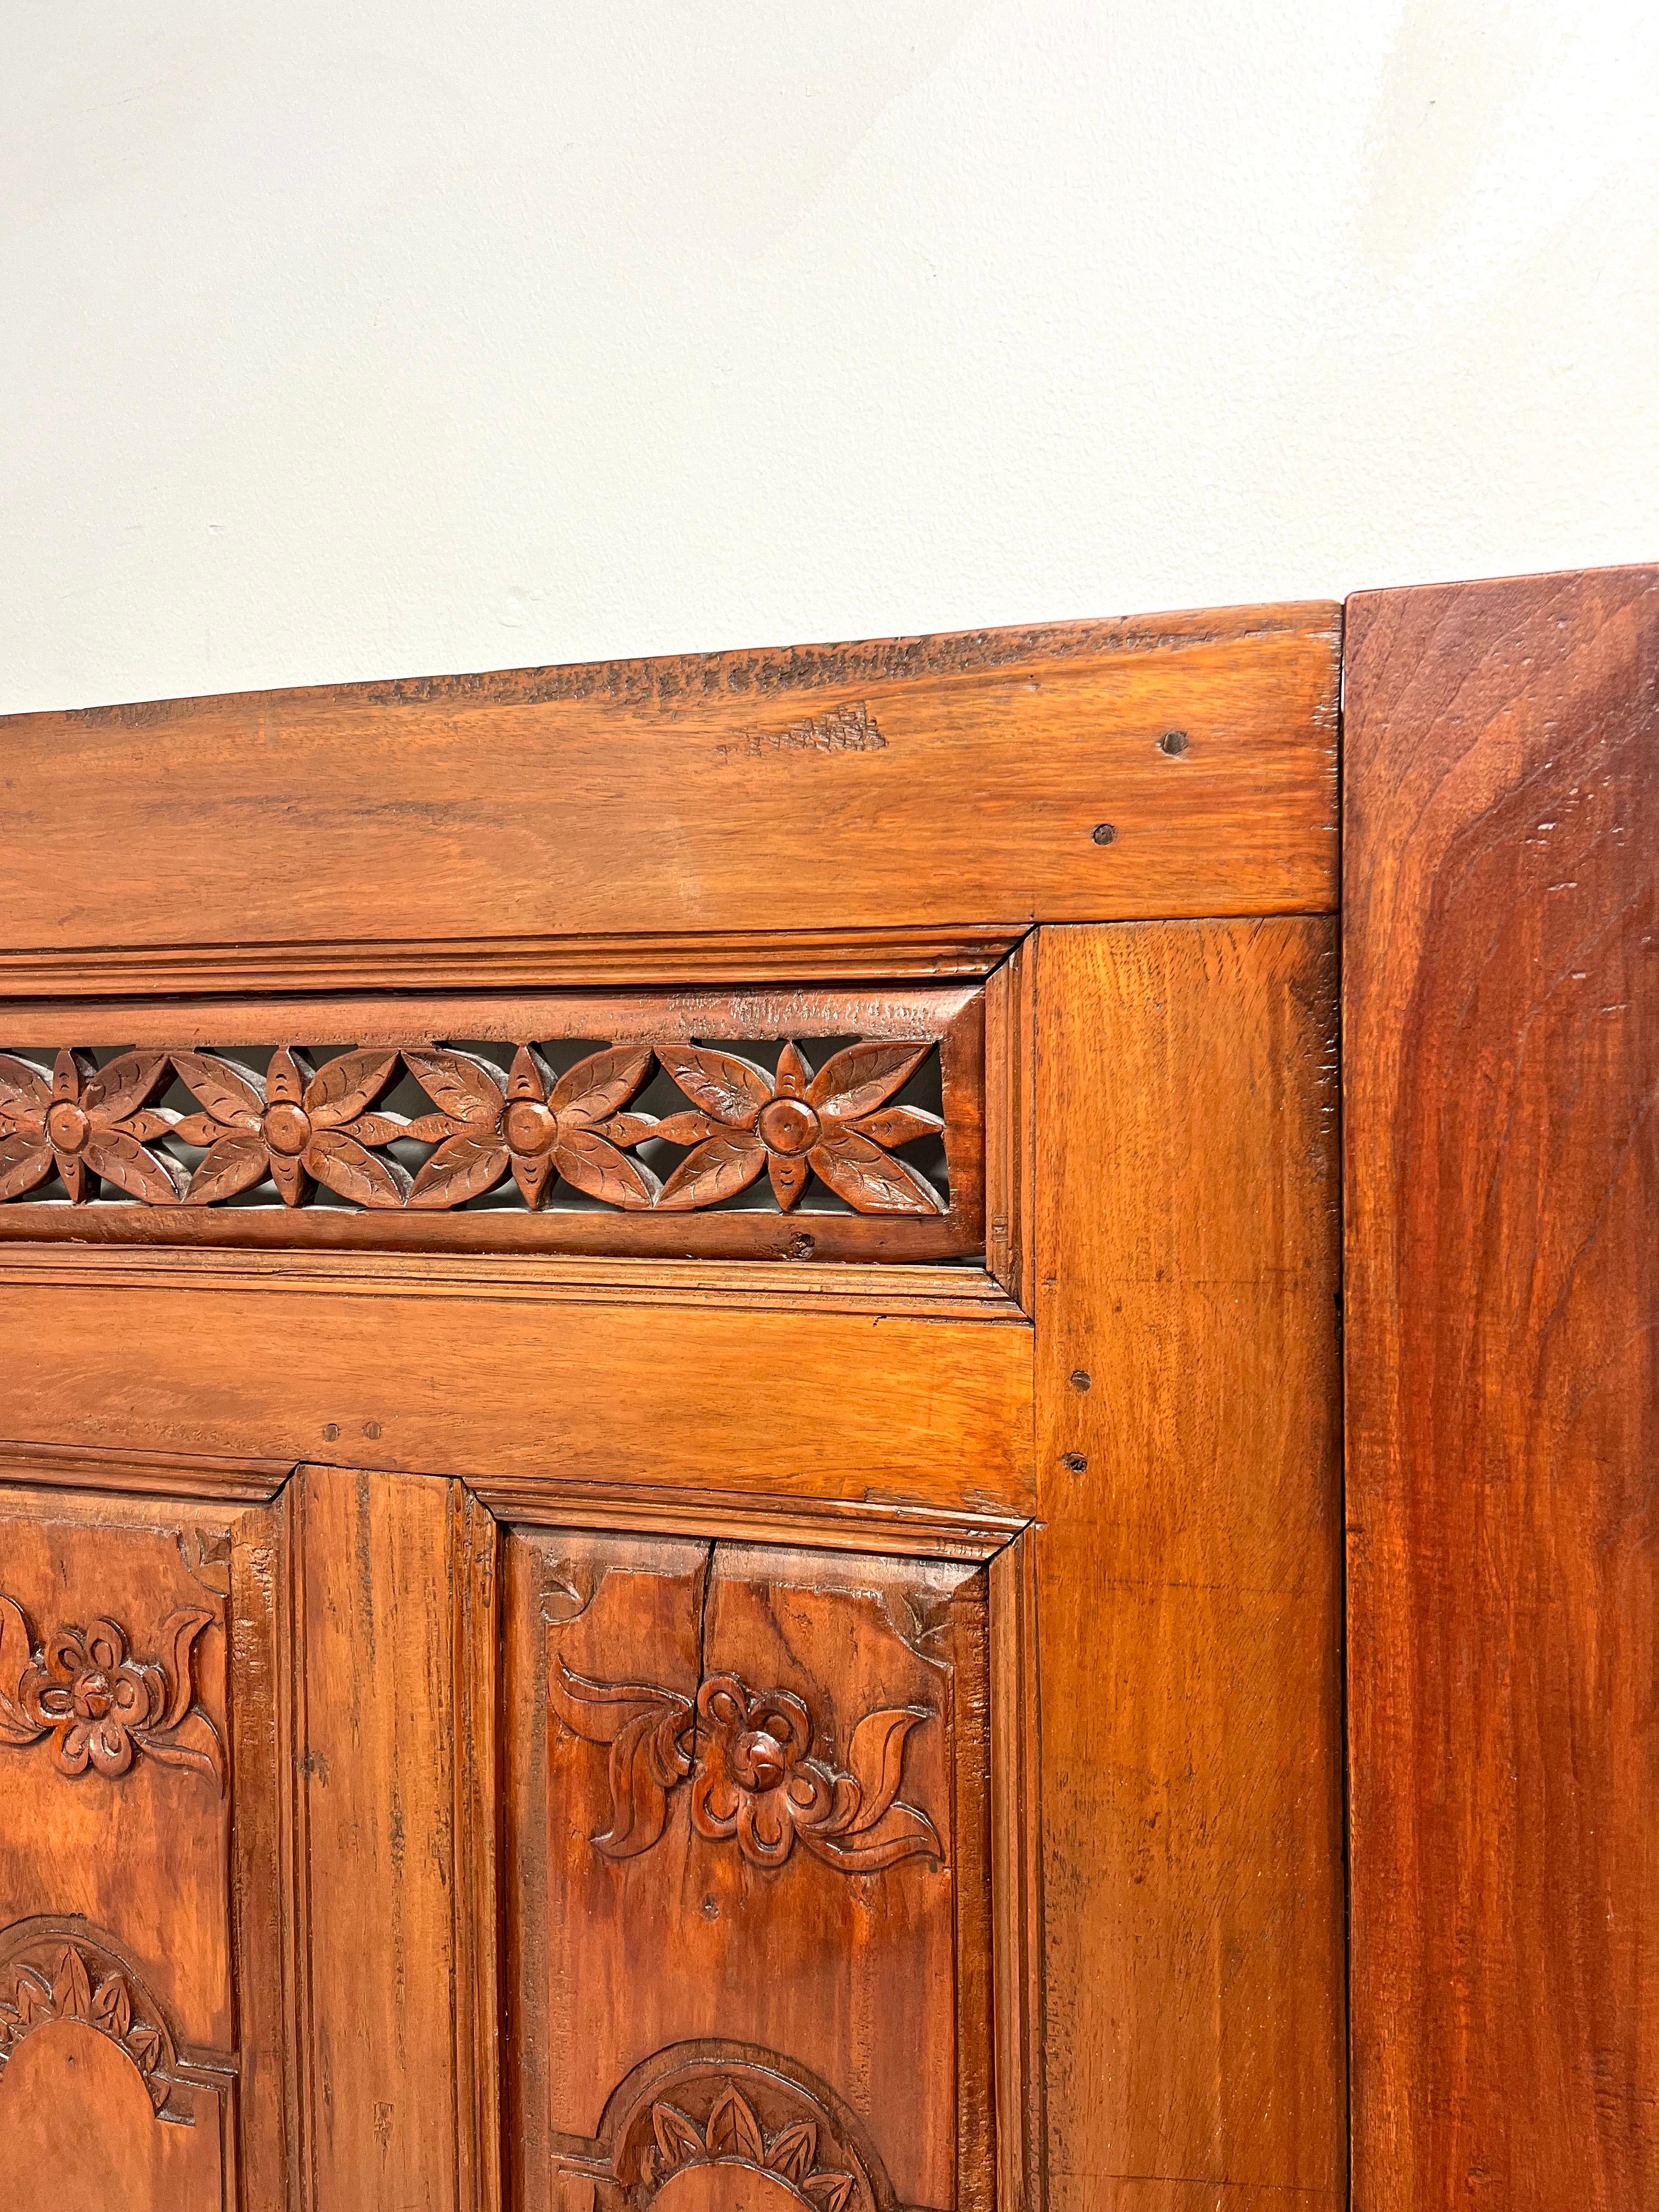 20th Century Carved Balinese Mahogany Doors Converted to Headboards - Pair In Good Condition For Sale In Charlotte, NC